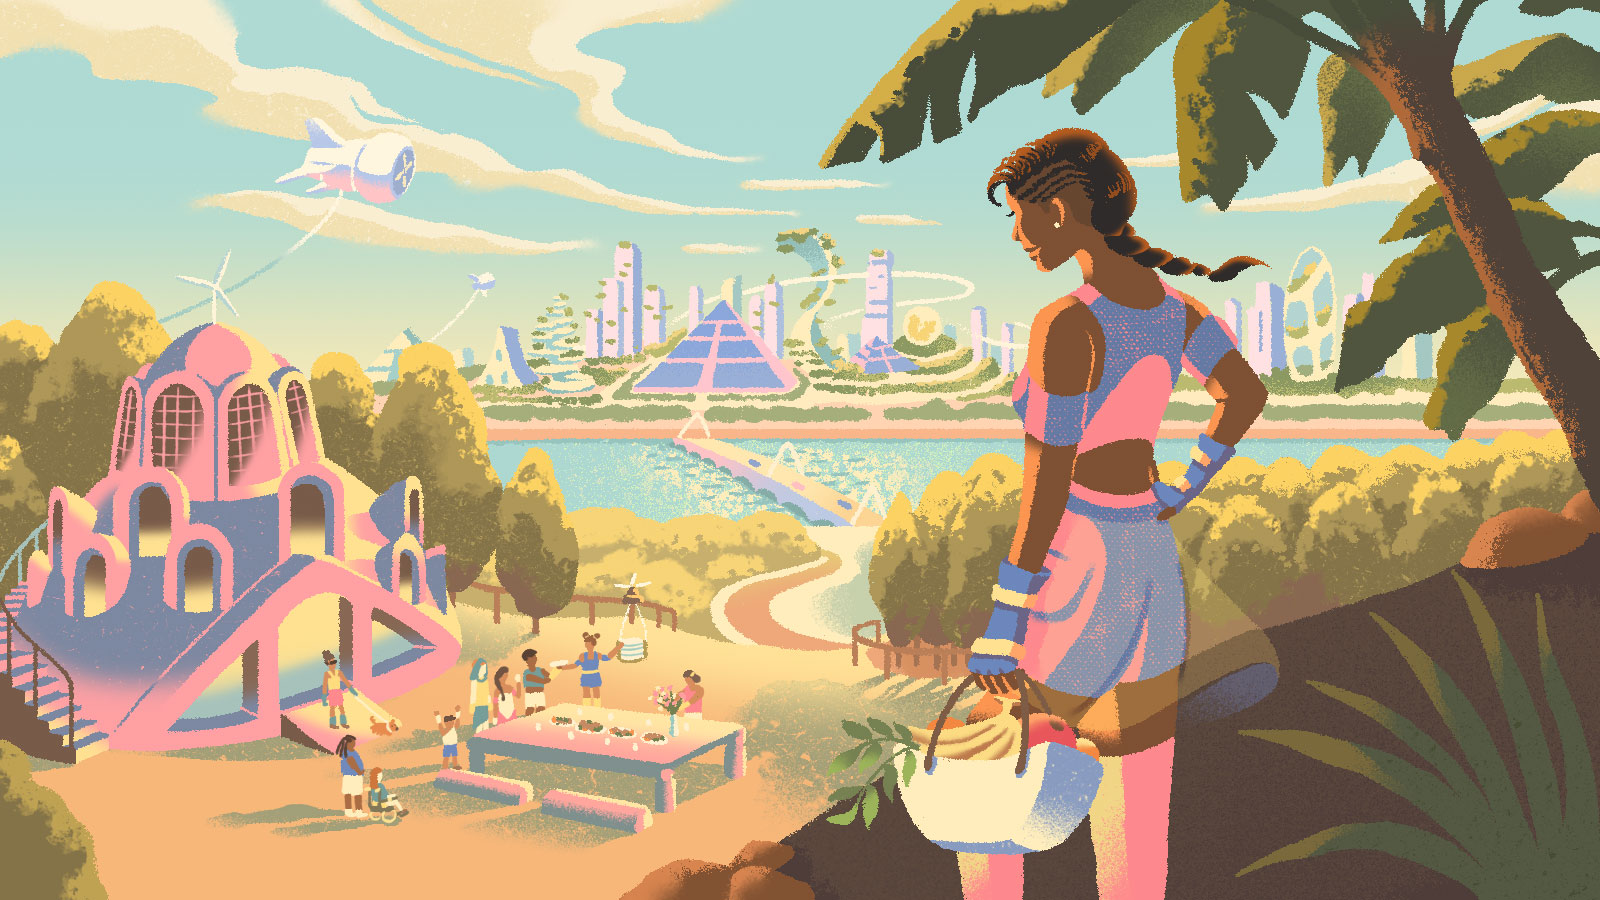 A futuristically dressed Black woman holds a basket of fruit and looks down at a picnic scene below. Wind turbines float in the air and a city can be seen in the distance.